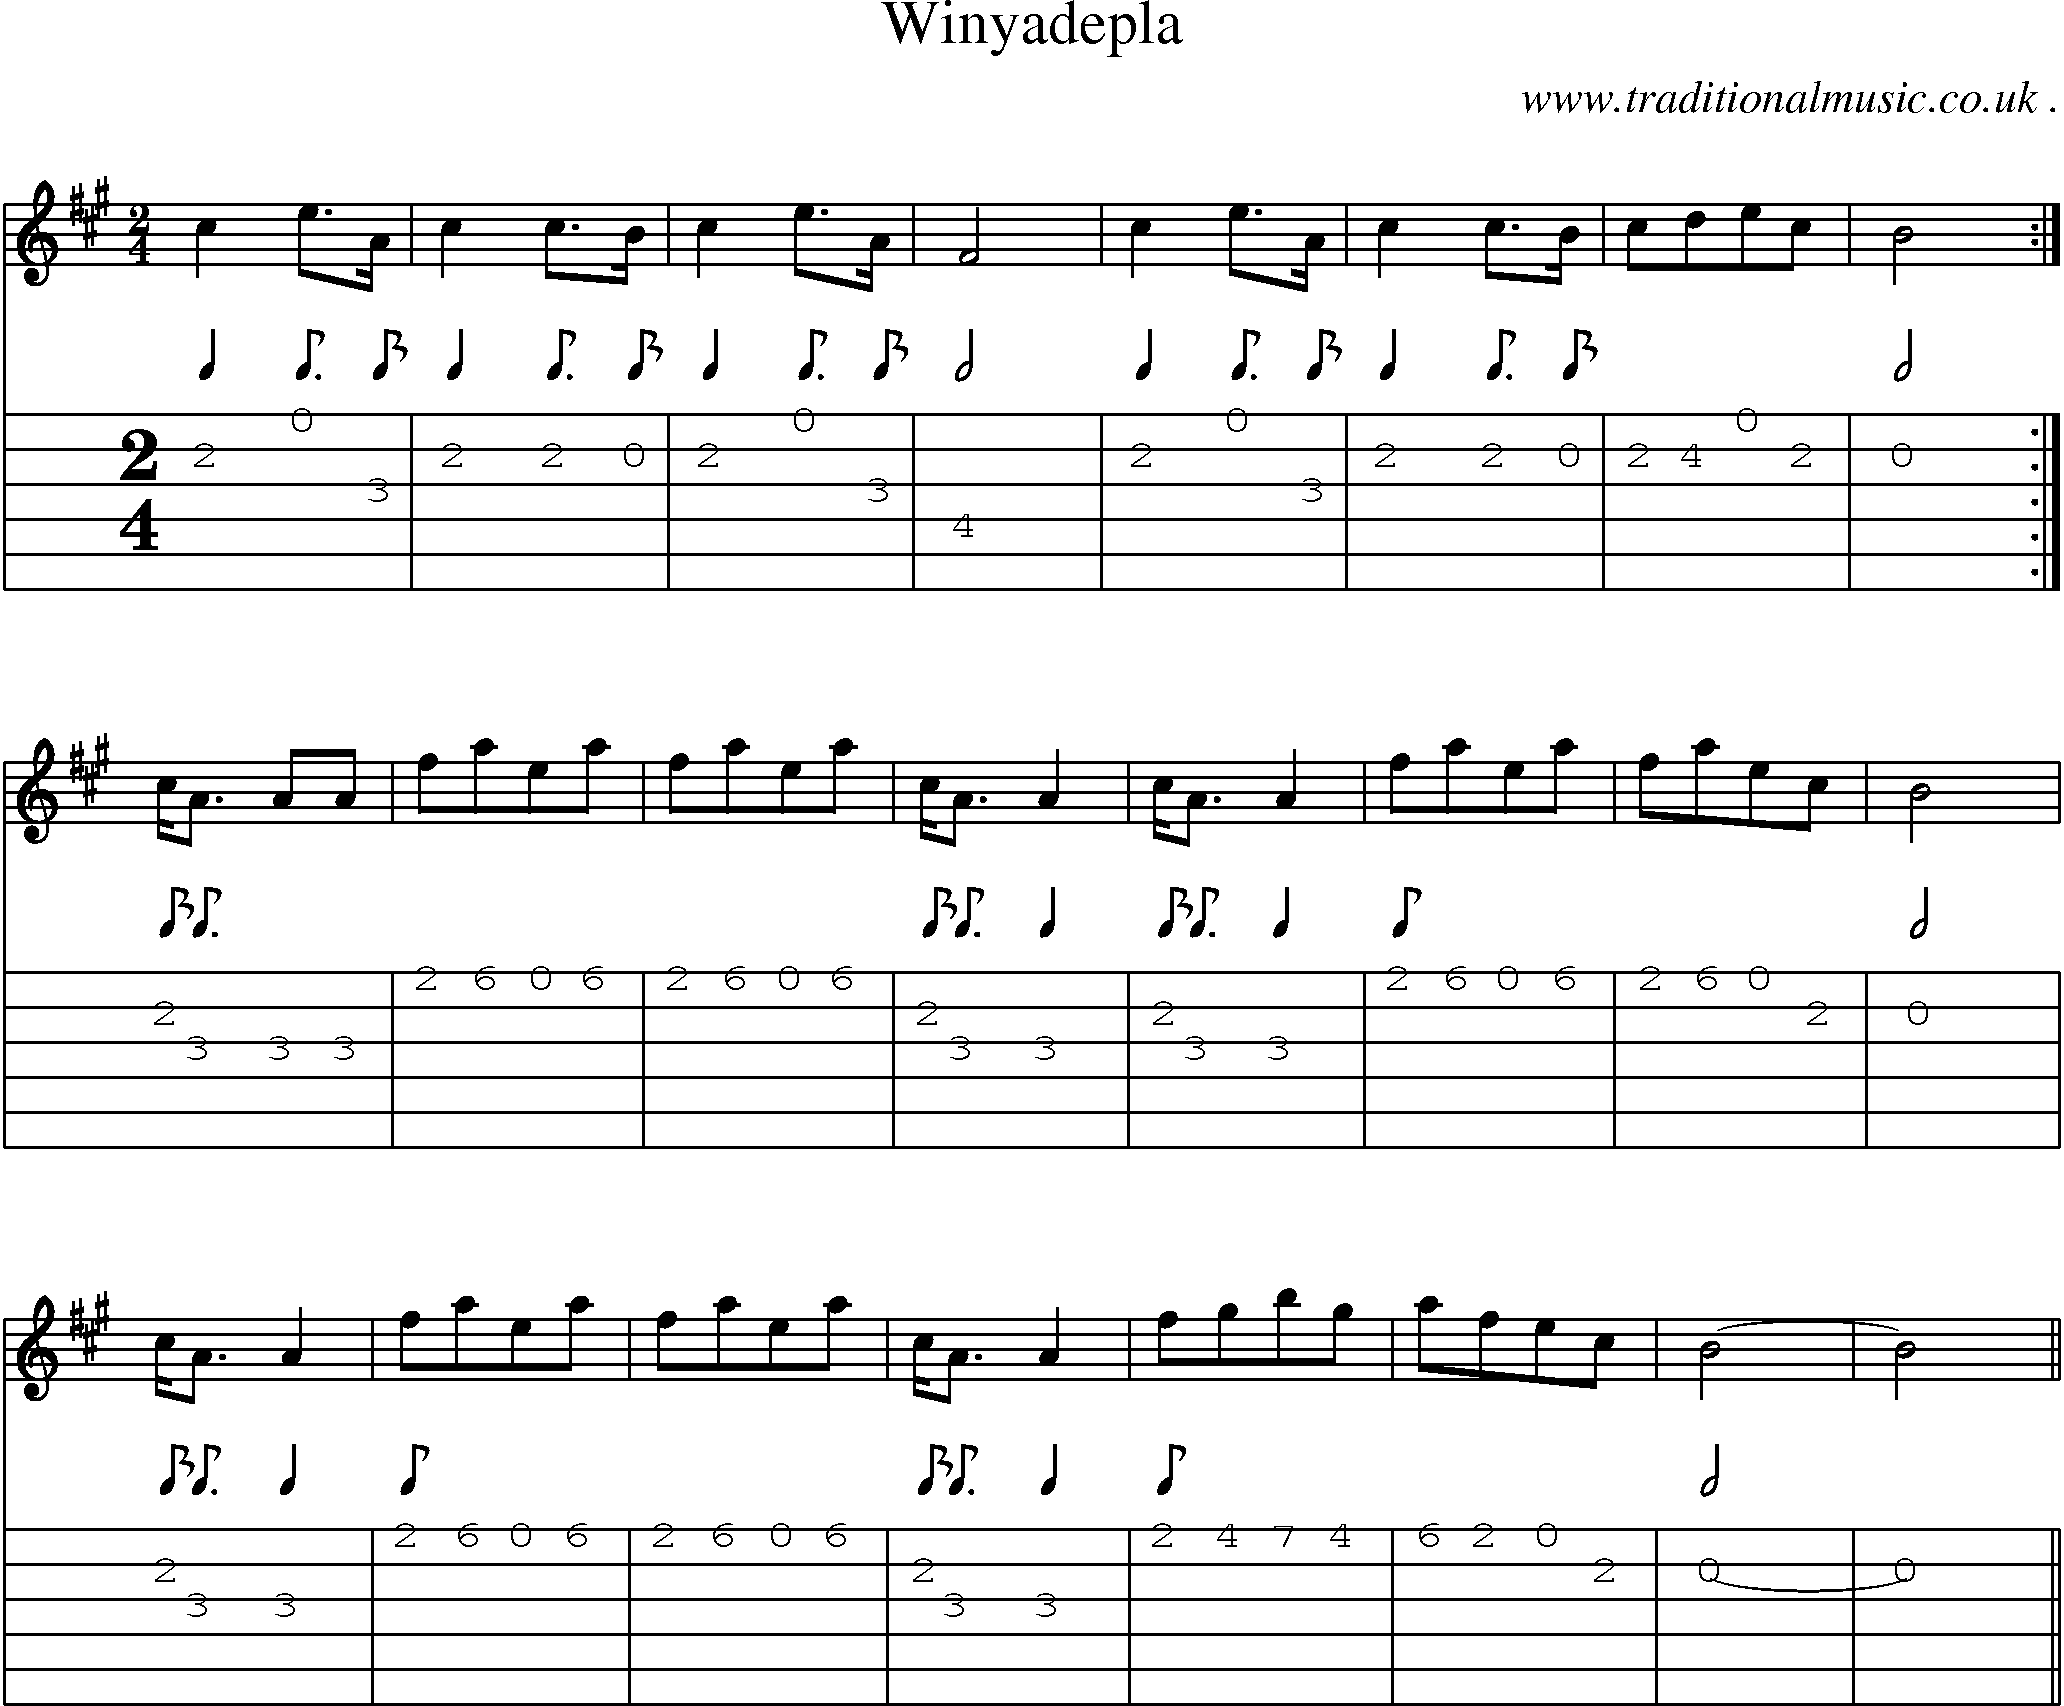 Sheet-Music and Guitar Tabs for Winyadepla